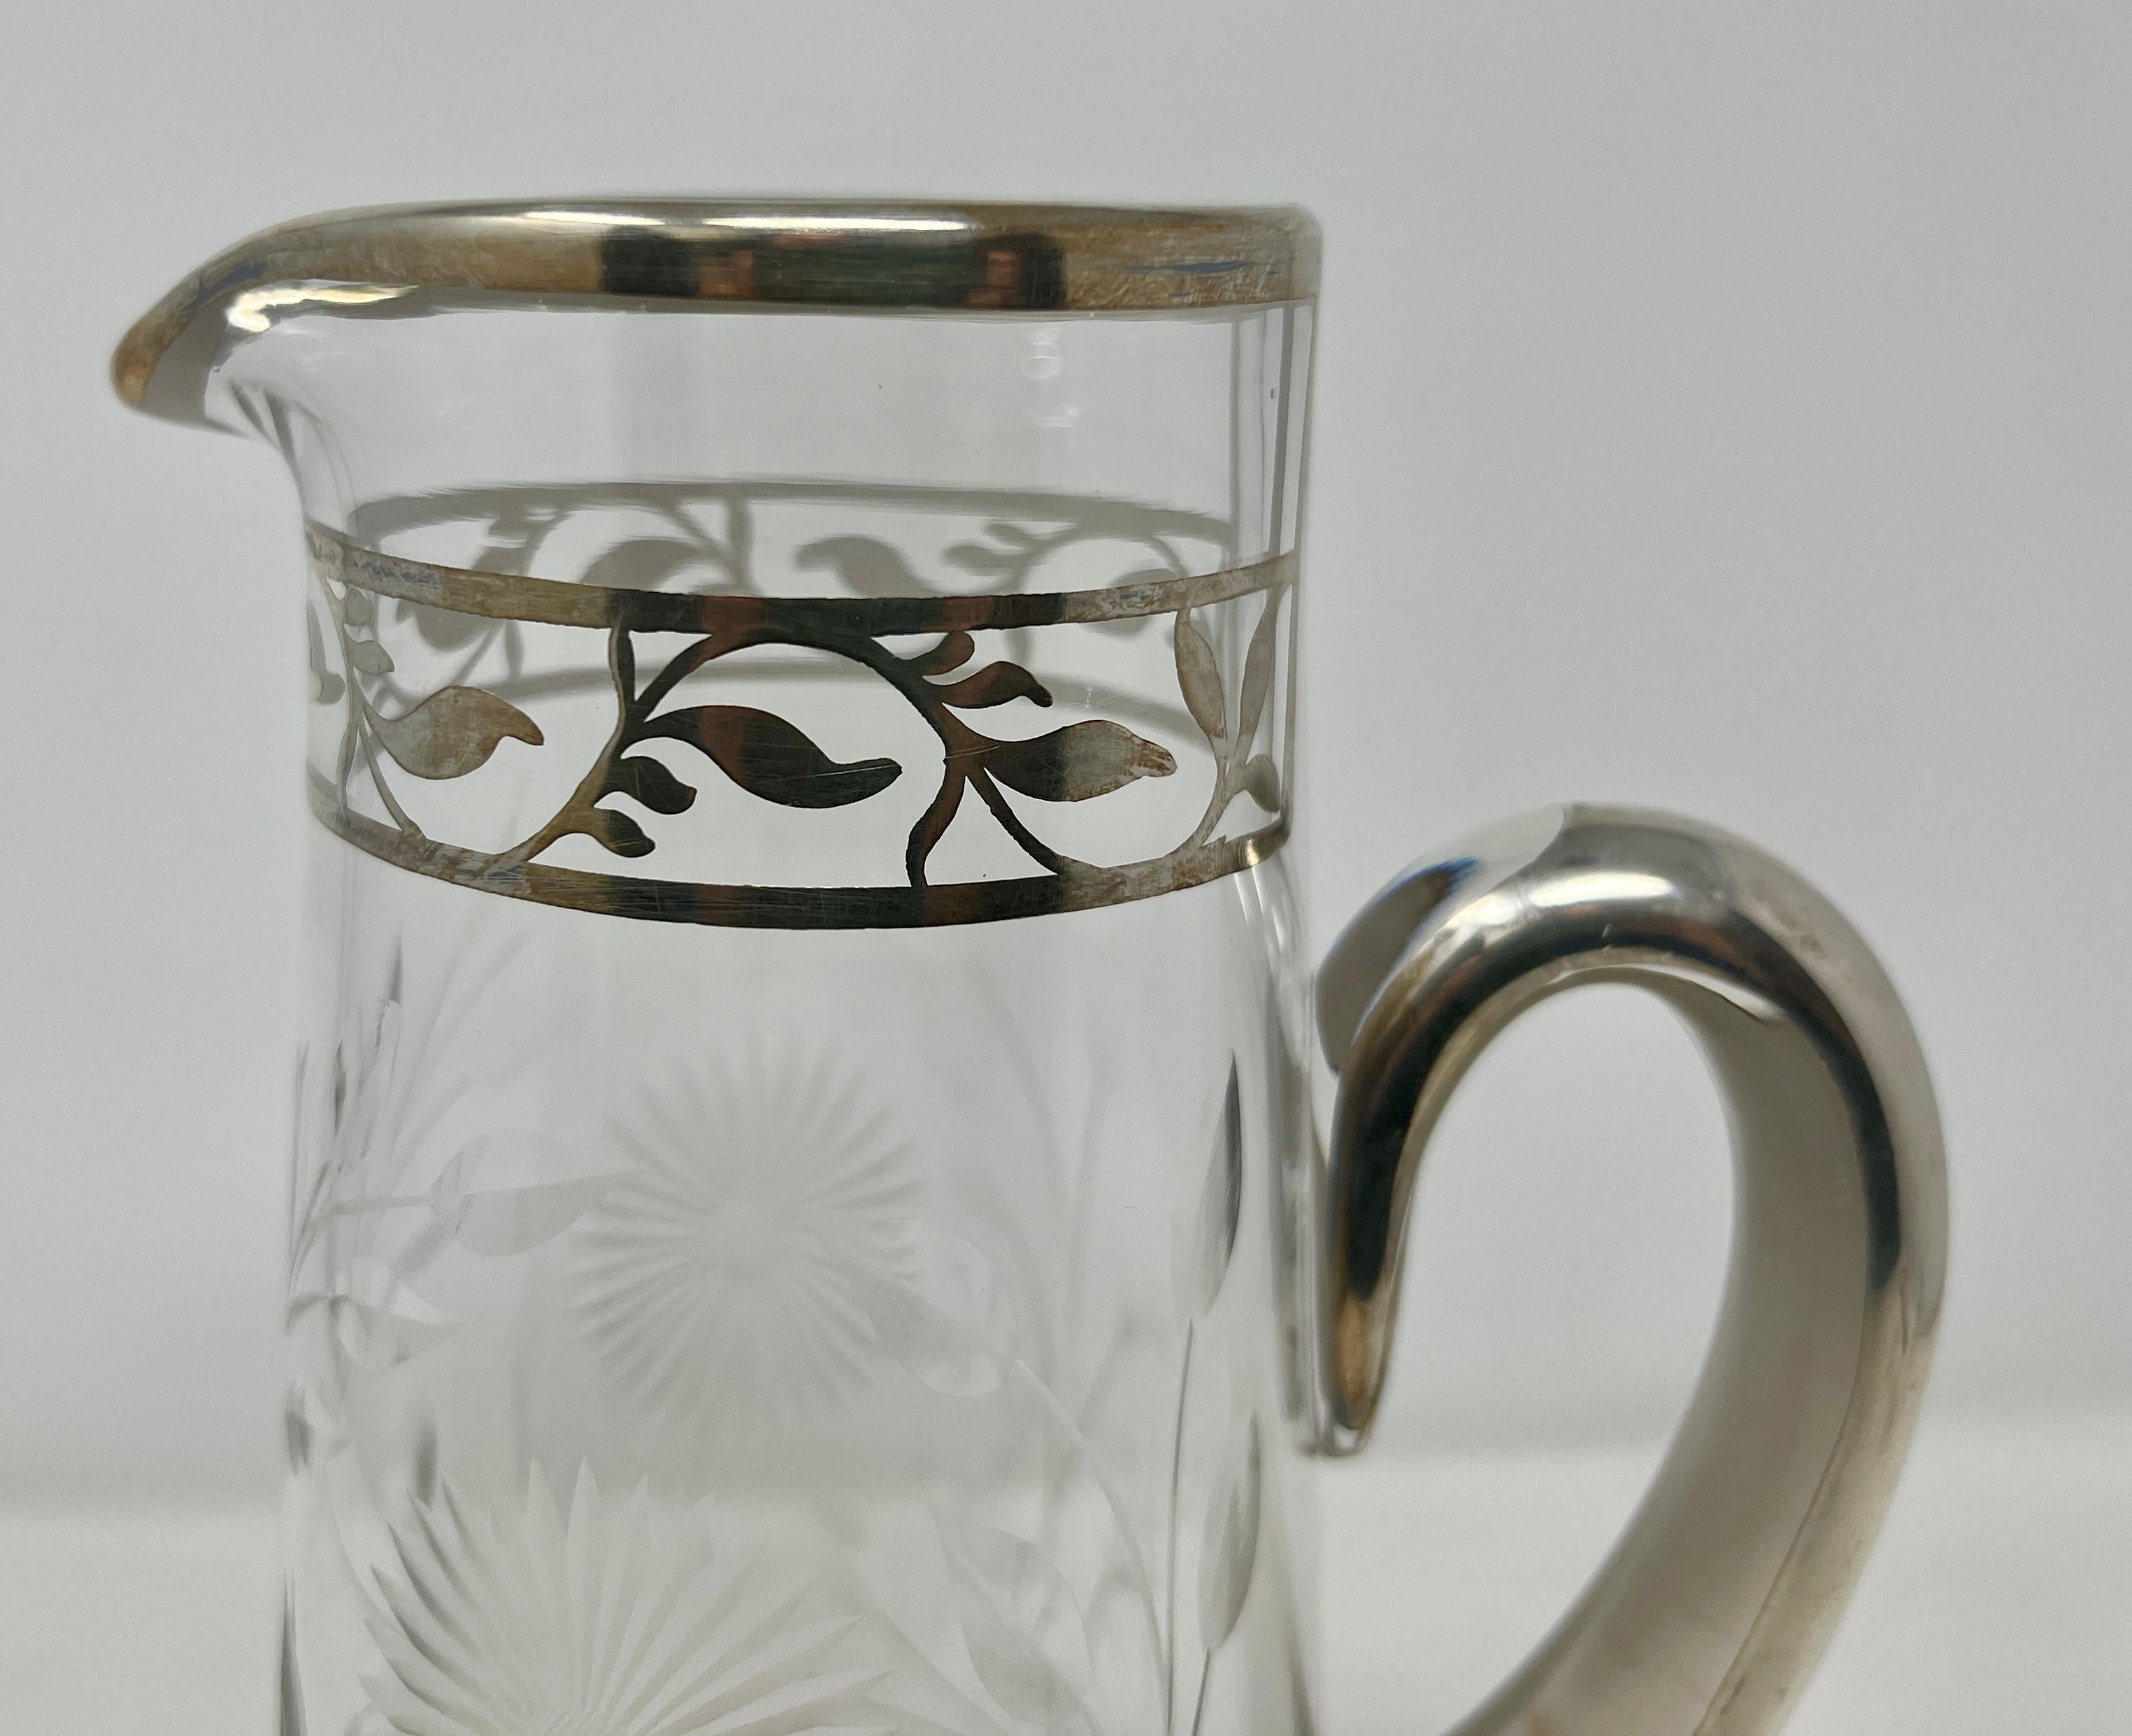 Antique Hand Etched & Wheel Carved Glass Pitcher with Sterling Silver Overlay, Circa 1920s-1930s.